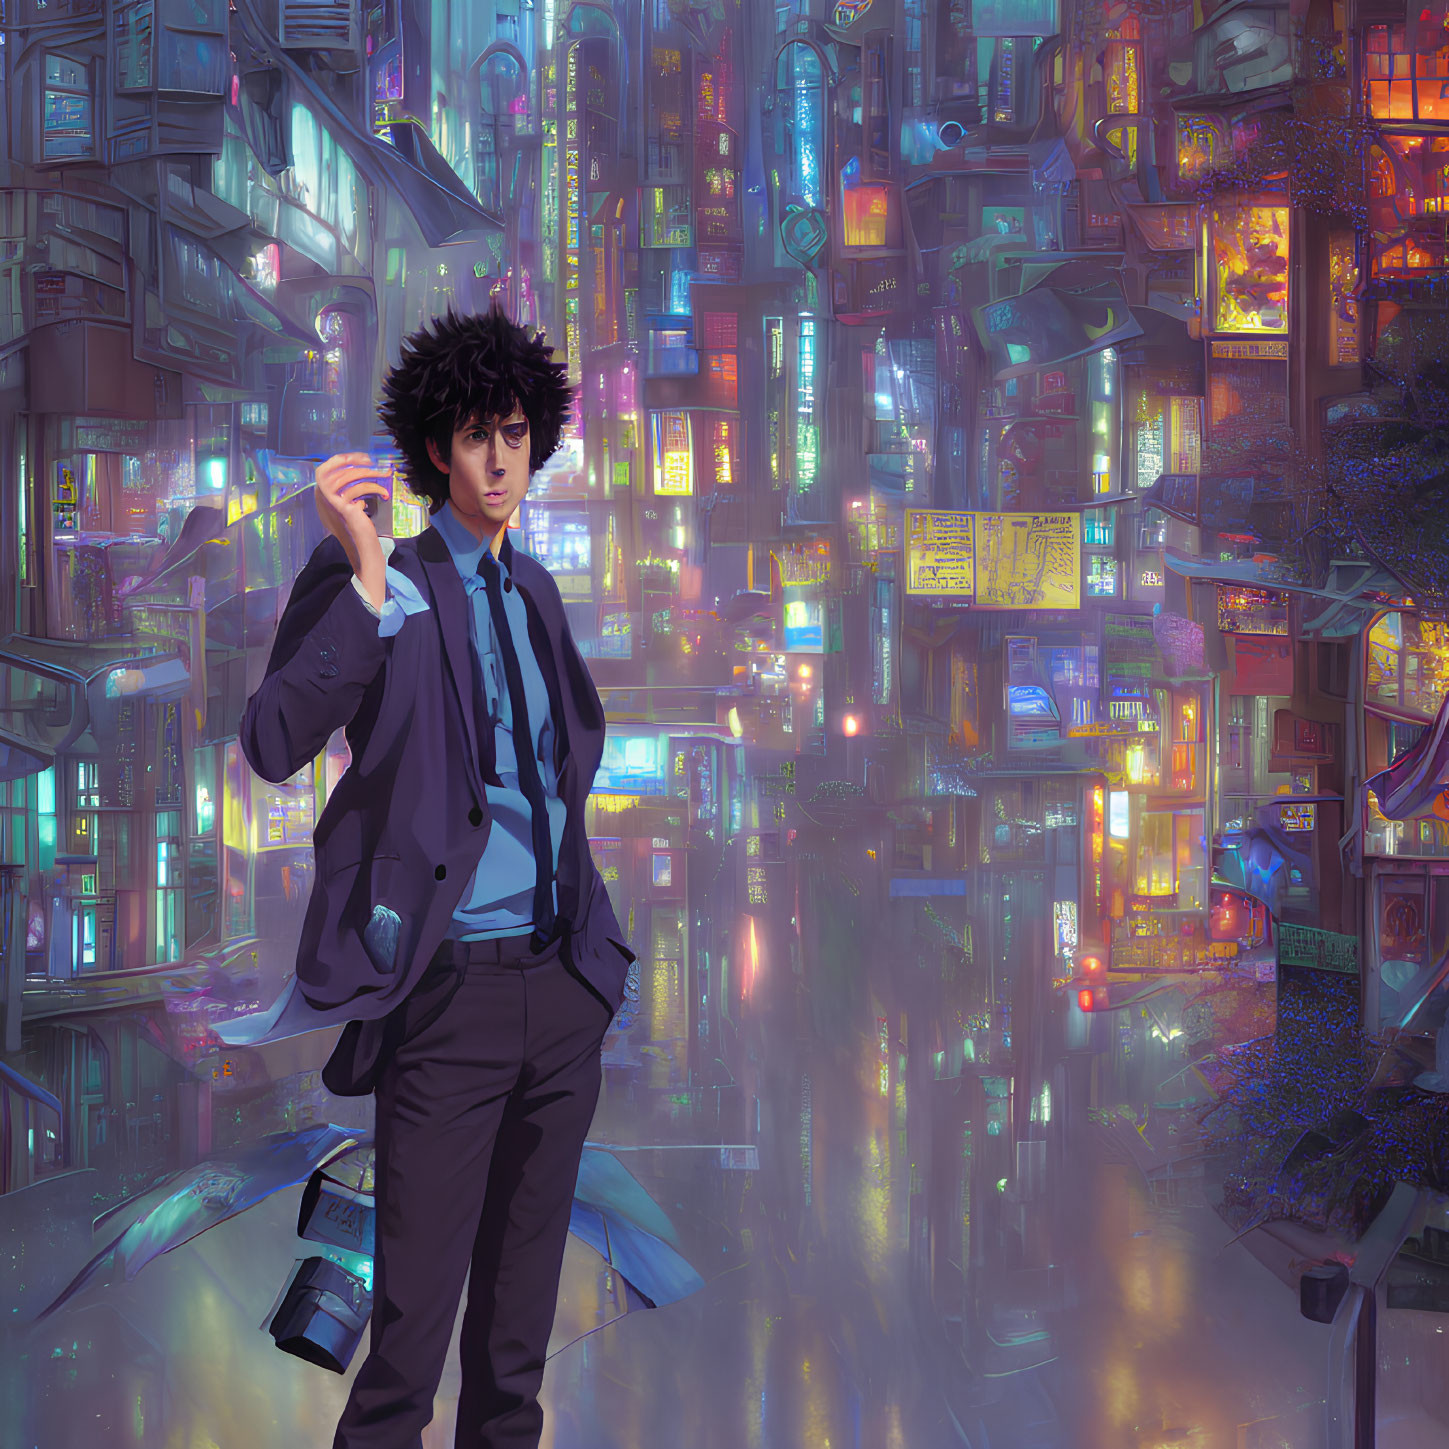 Black-haired person in neon-lit futuristic cityscape with glowing sphere